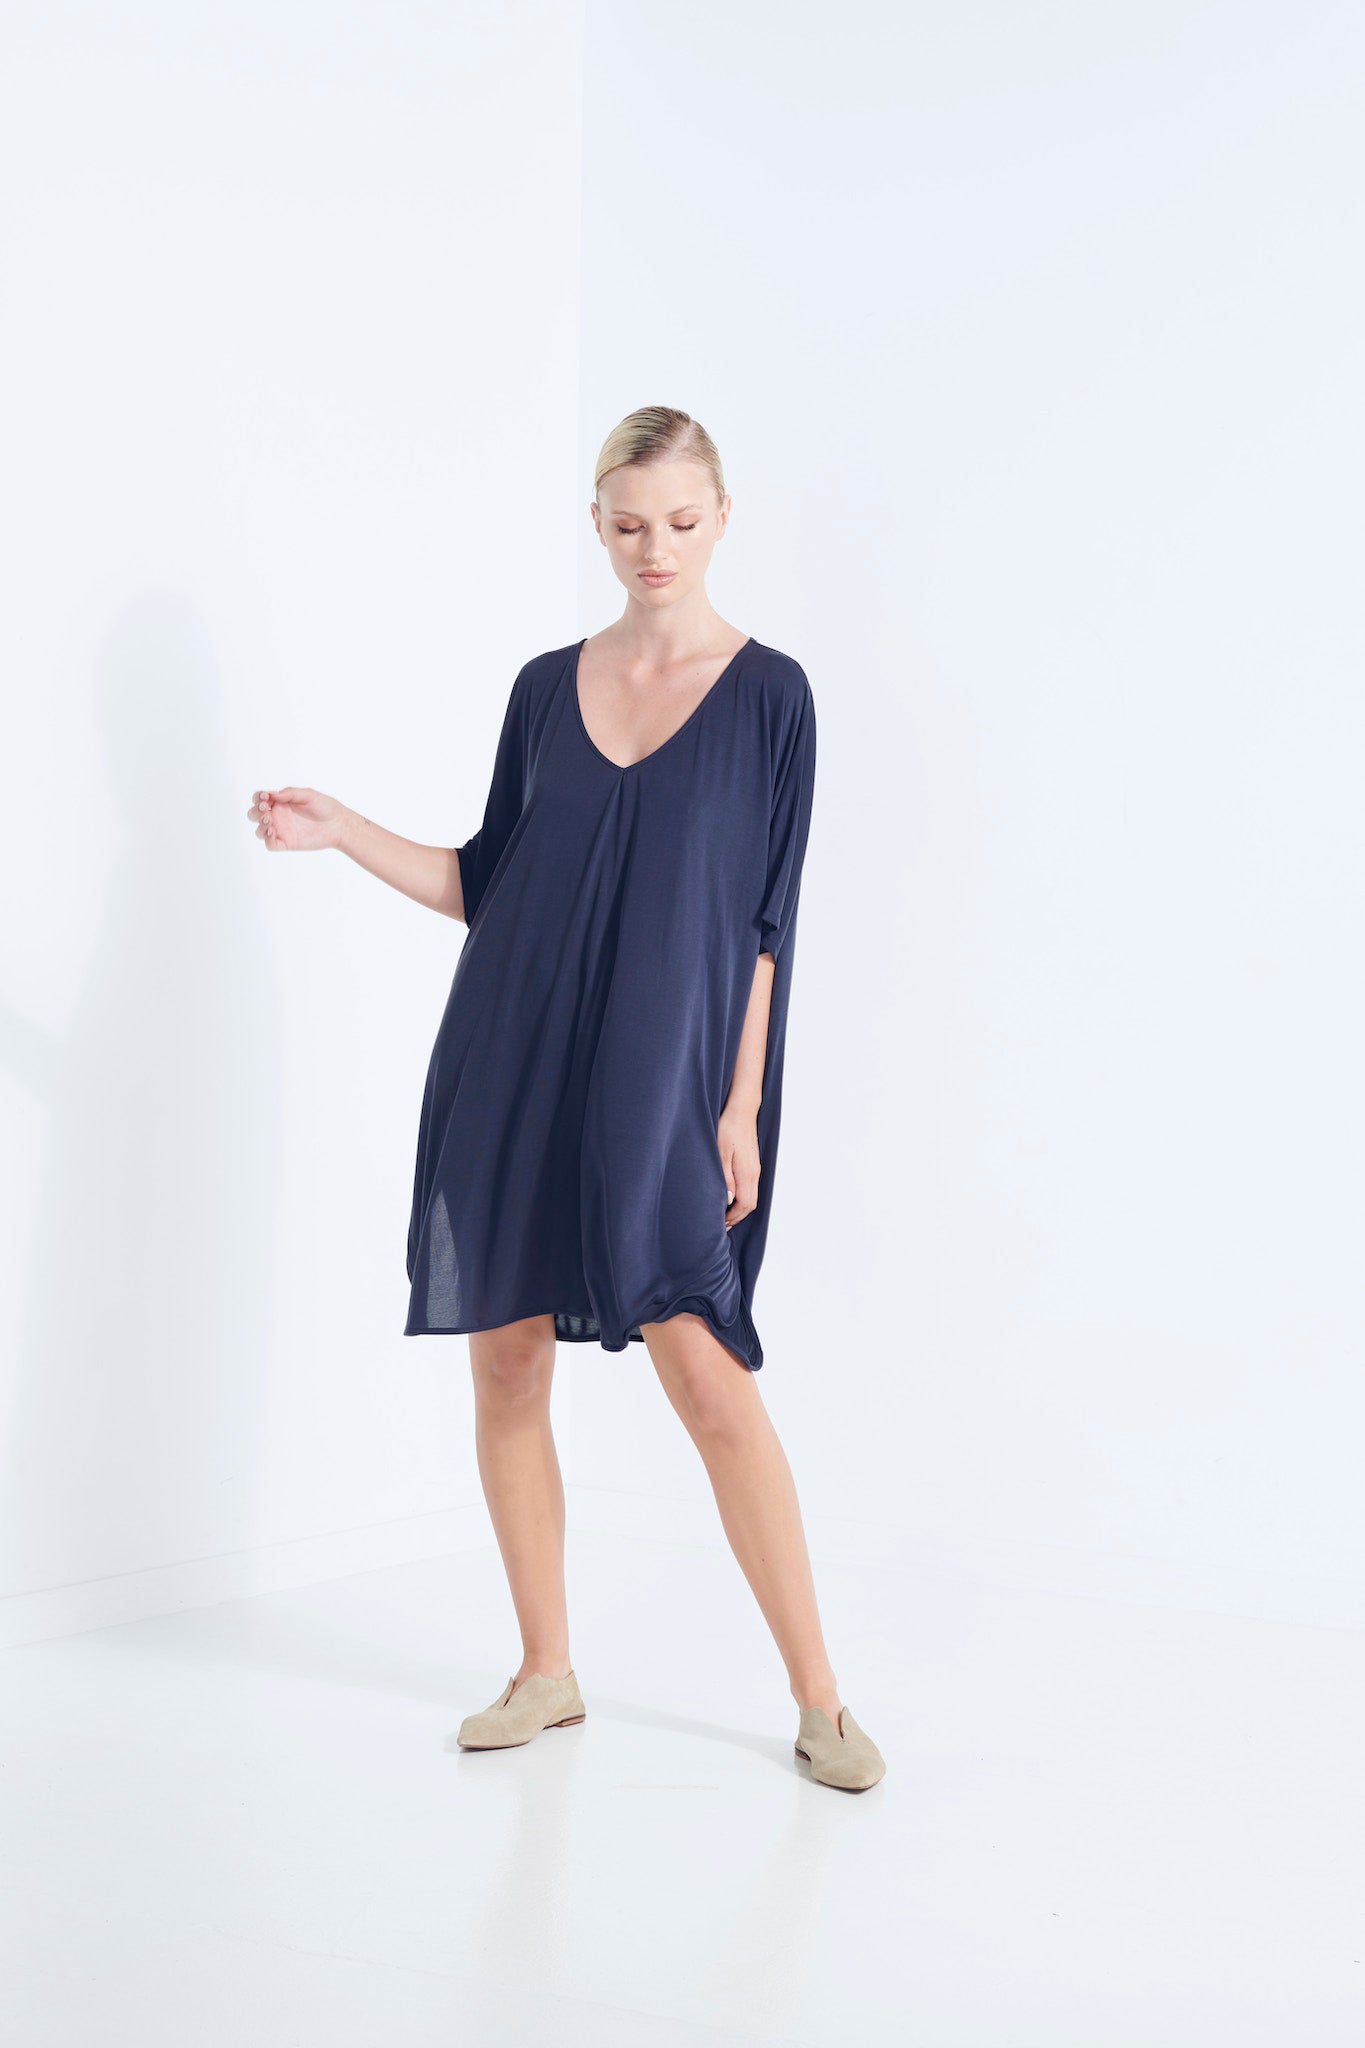 THEMIS DRESS LONGLINE T-SHIRT BEECHWOOD MODAL STRETCH WITH REMOVABLE TIE AEGEAN WASHED NAVY FRONT VIEW